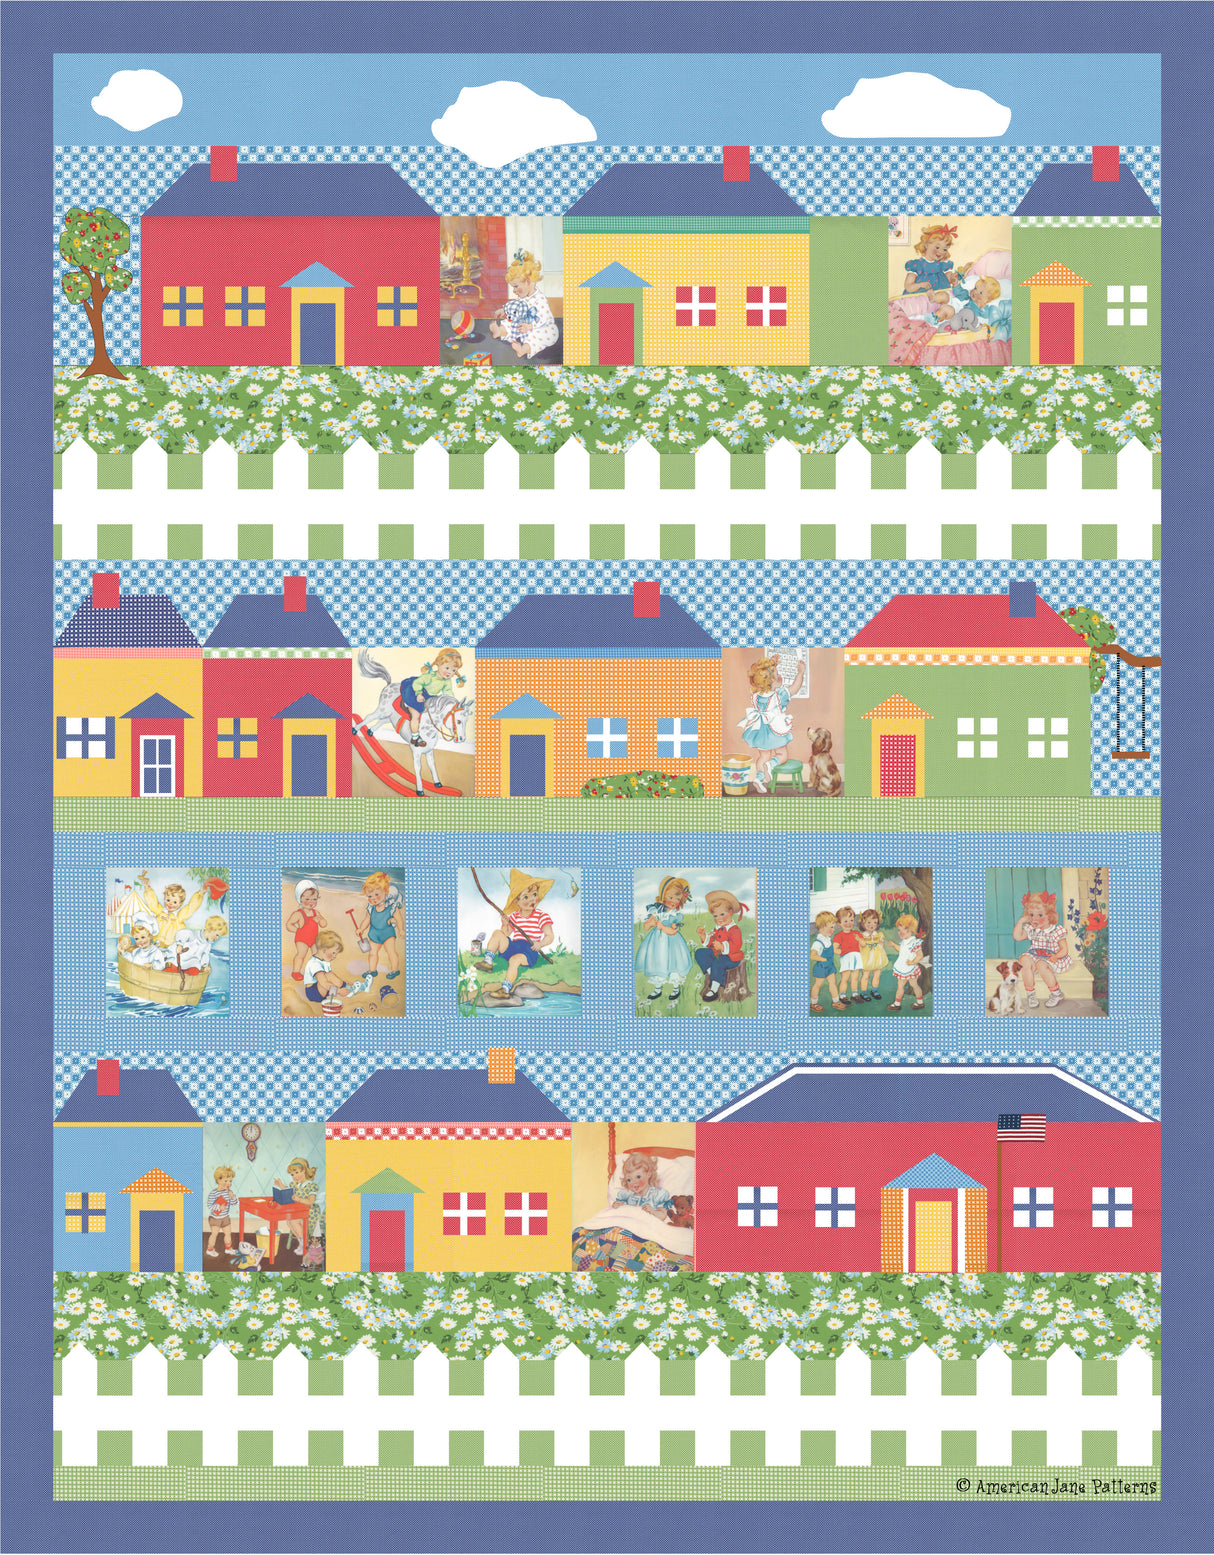 Home Town USA Downloadable Pattern by American Jane Patterns